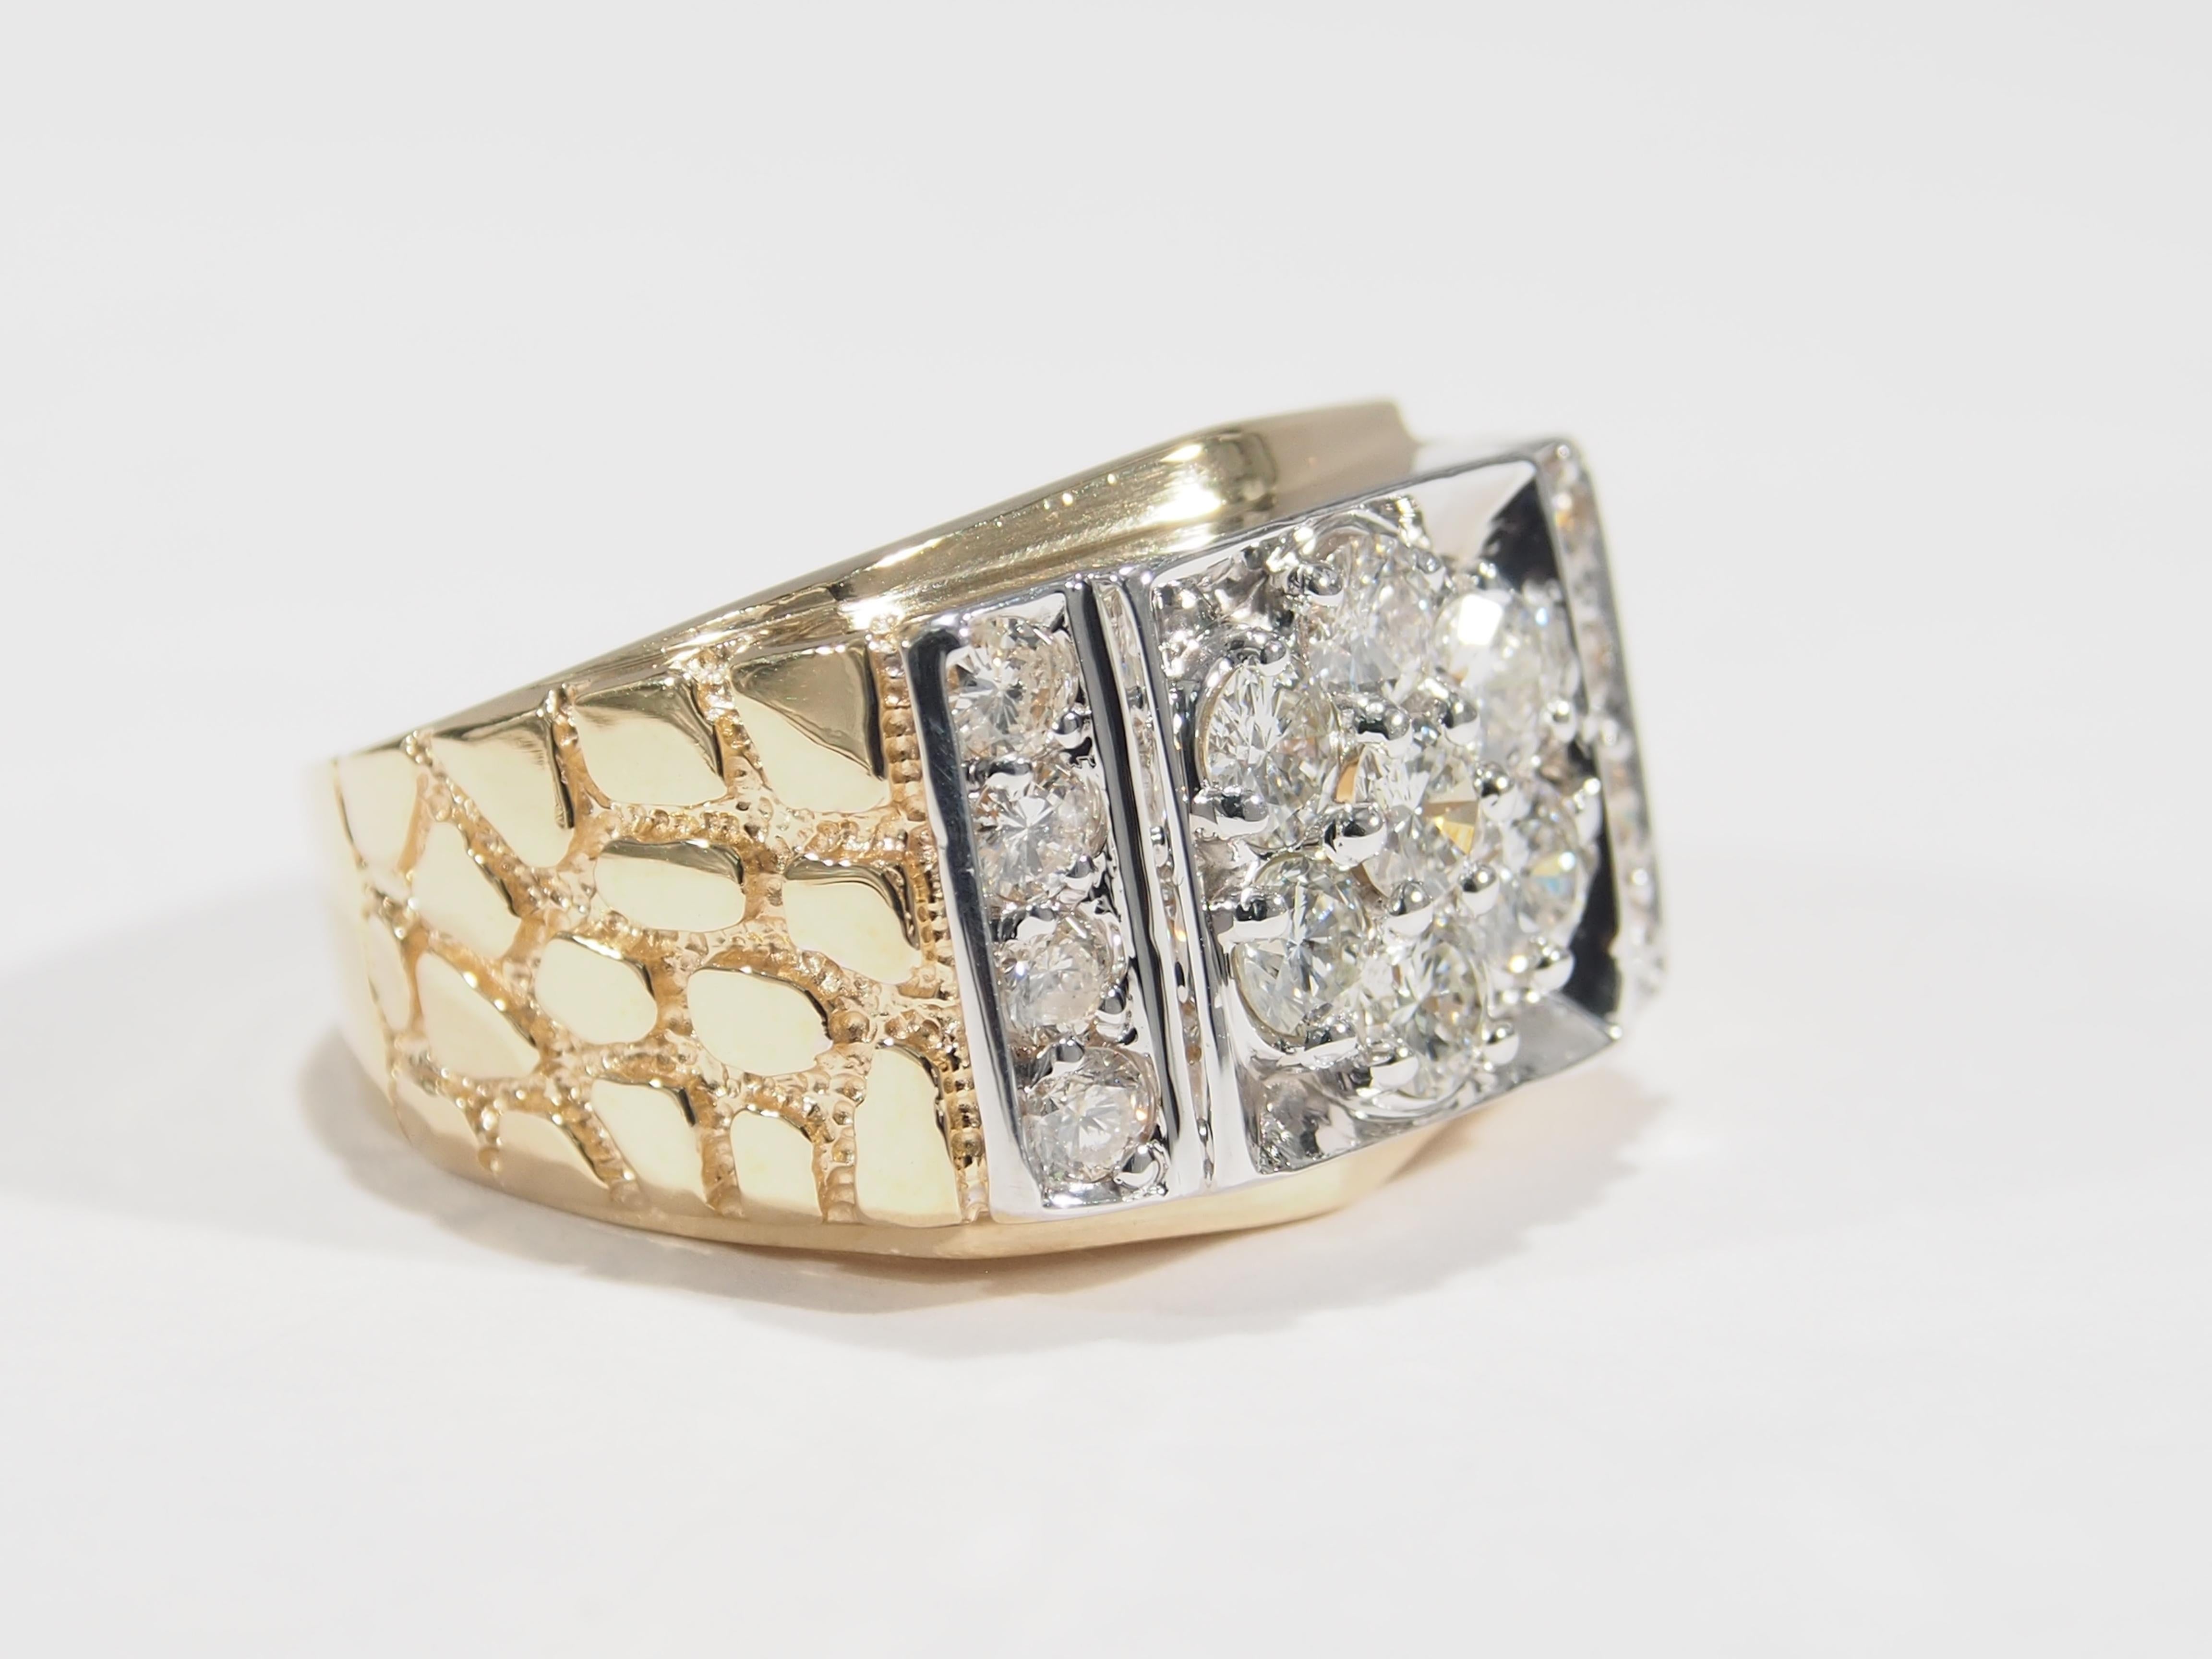 This is a sparkling 14K Yellow Gold Men's Diamond Cluster Ring boldly designed in a classic nugget style with (15) Round Brilliant Cut Diamonds, approximately 1.82ctw, G-I in Color, SI-I1 in Color. A lustrous Ring that is 1/2 inch in width, 3/4 inch